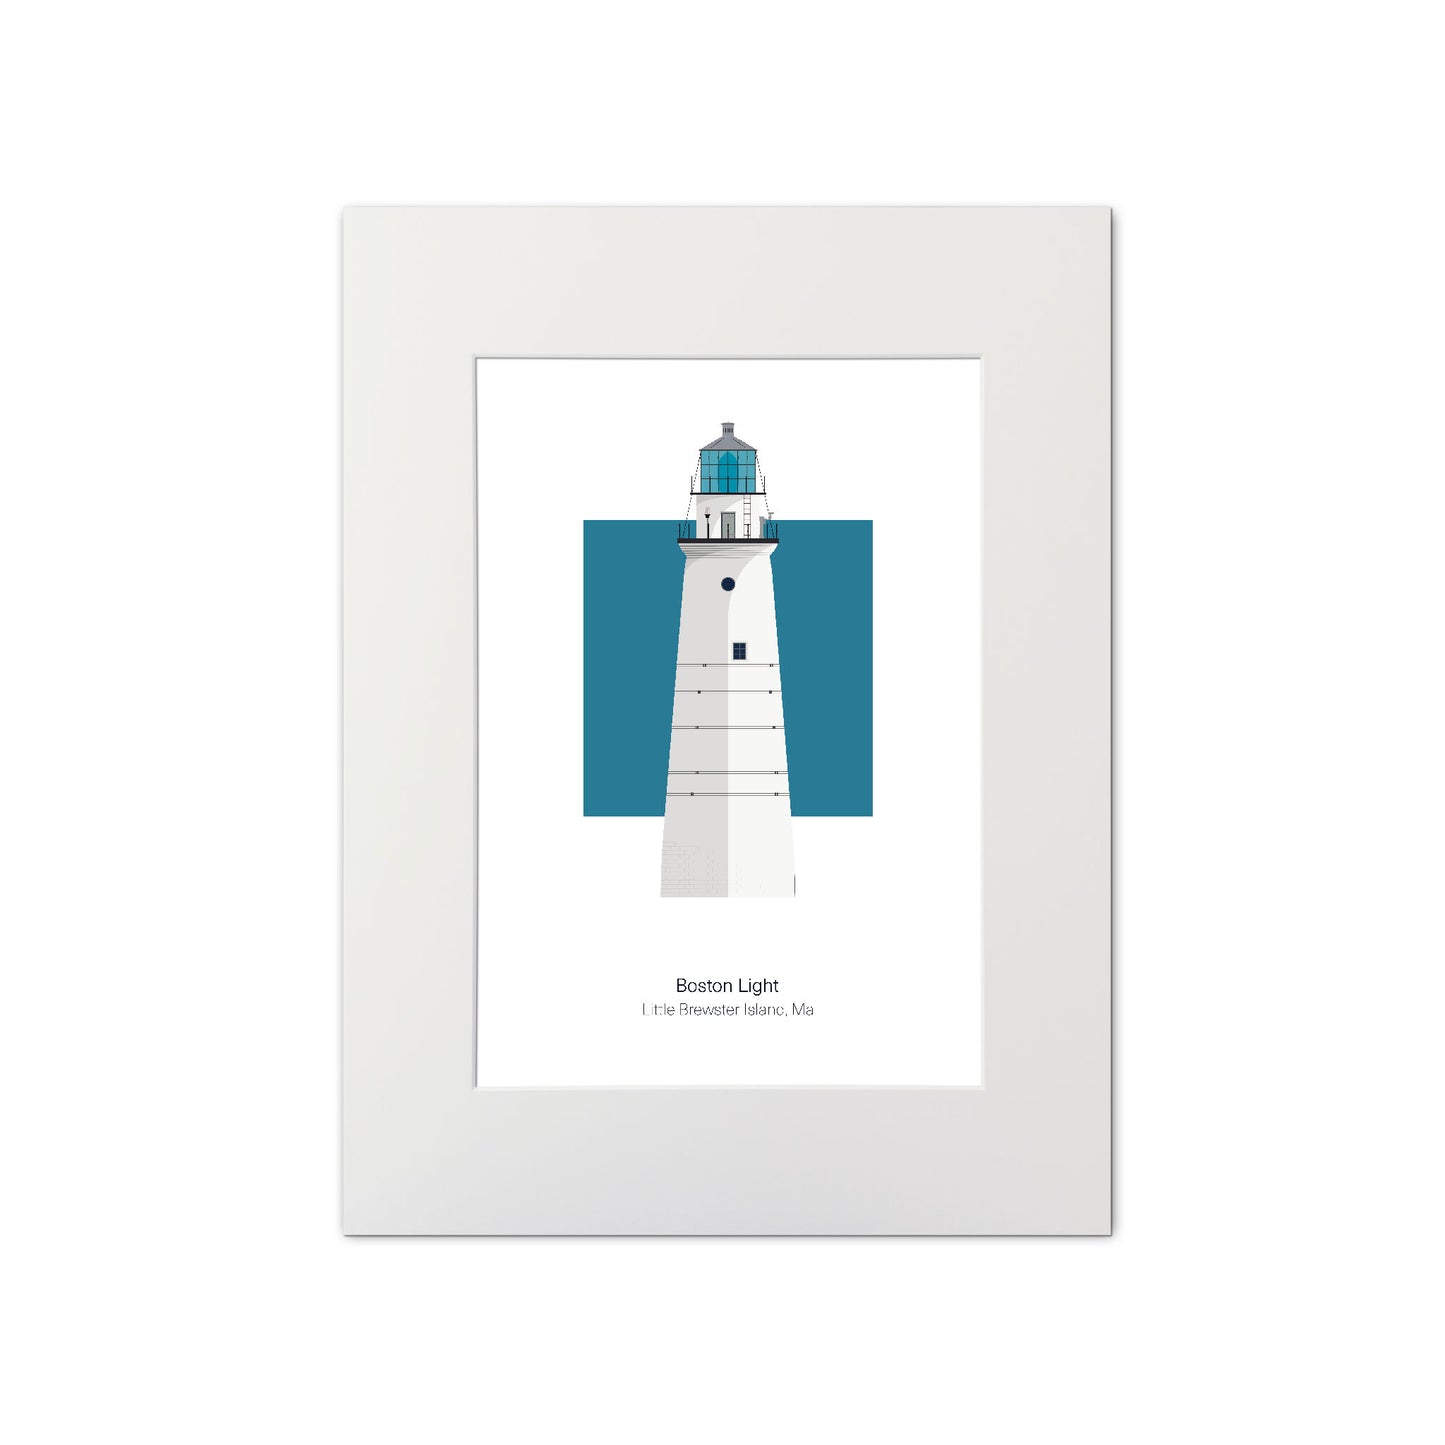 Illustration of the Boston Light, Massachusetts, USA. On a white background with aqua blue square as a backdrop., mounted and measuring 11"x14" (30x40cm).